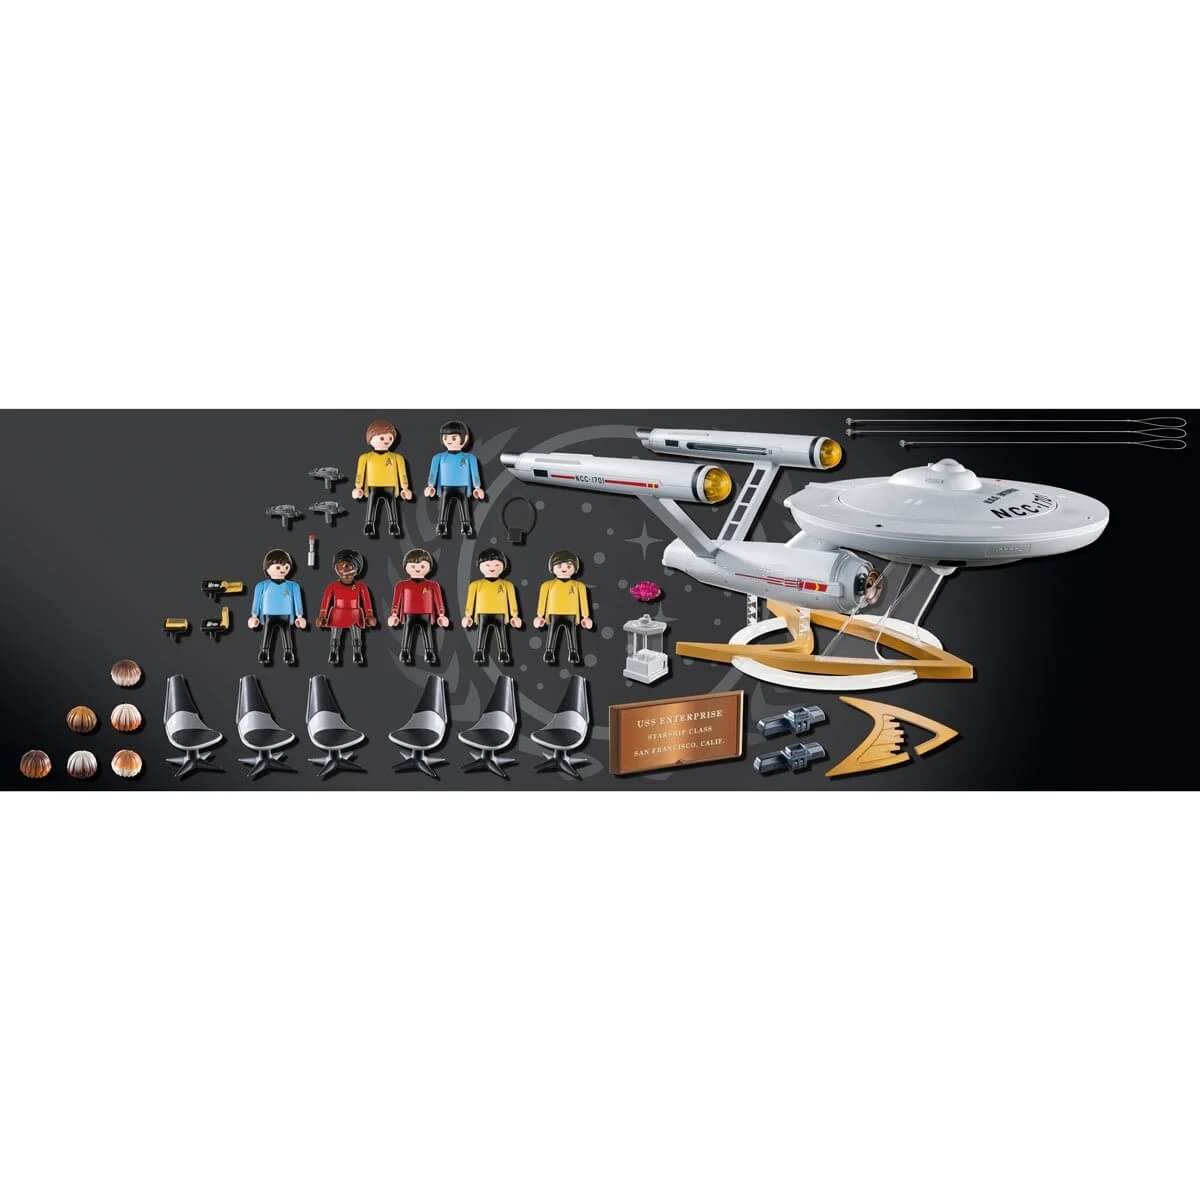 Included is the U.S.S. Enetrprise, Kirk, Spock, McCoy, Scotty, Uhura, Sulu, Chekov, phasers, devices, dilithium crystal container, chairs, hair-pieces, plaque, insignia display stand, wire hanger, and accessories.